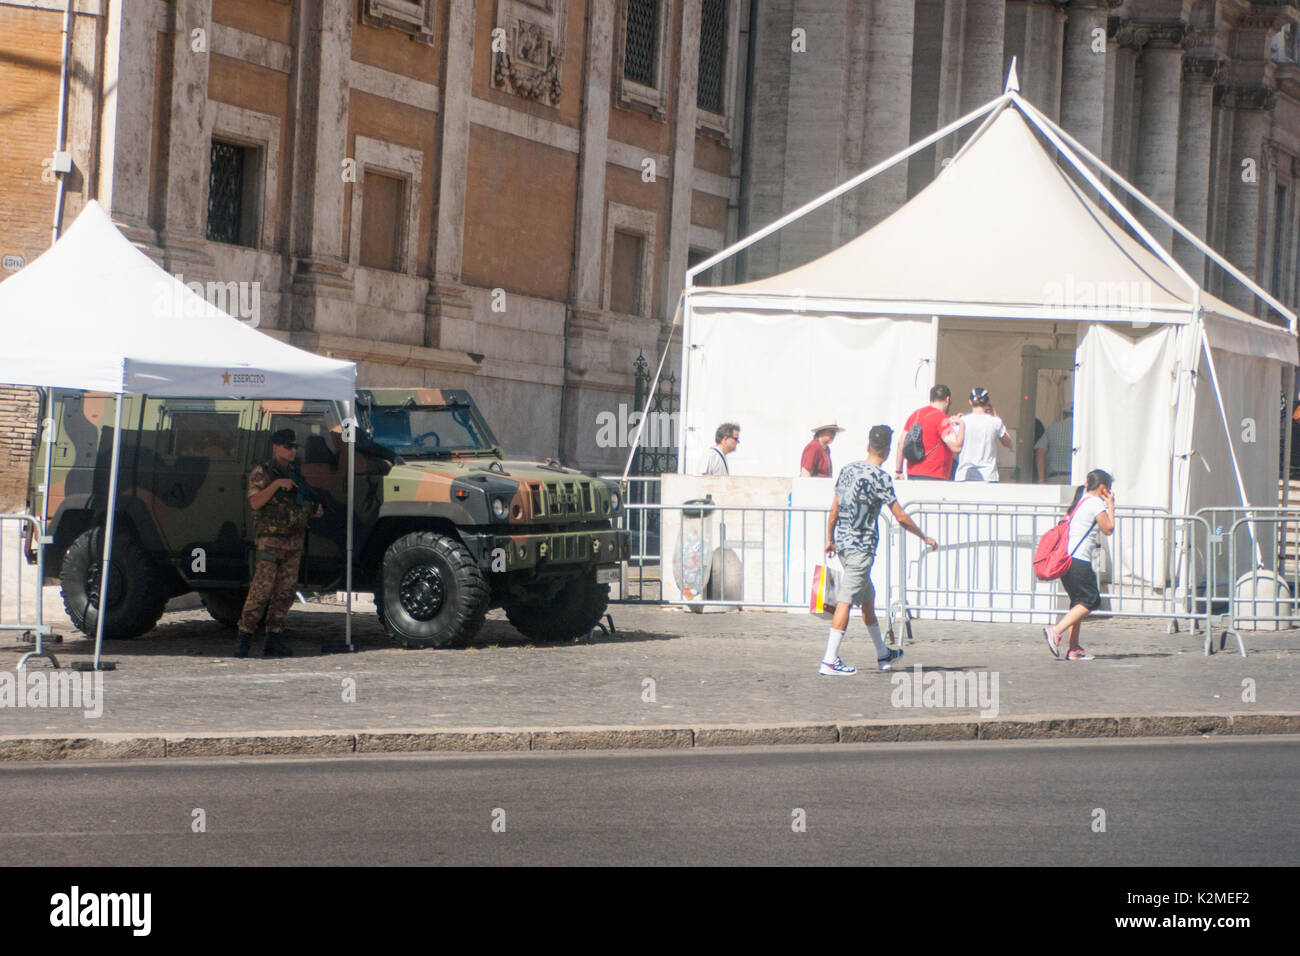 metal detector and security check before entry in the church of Santa Maria  Maggiore in Rome, Italy Stock Photo - Alamy